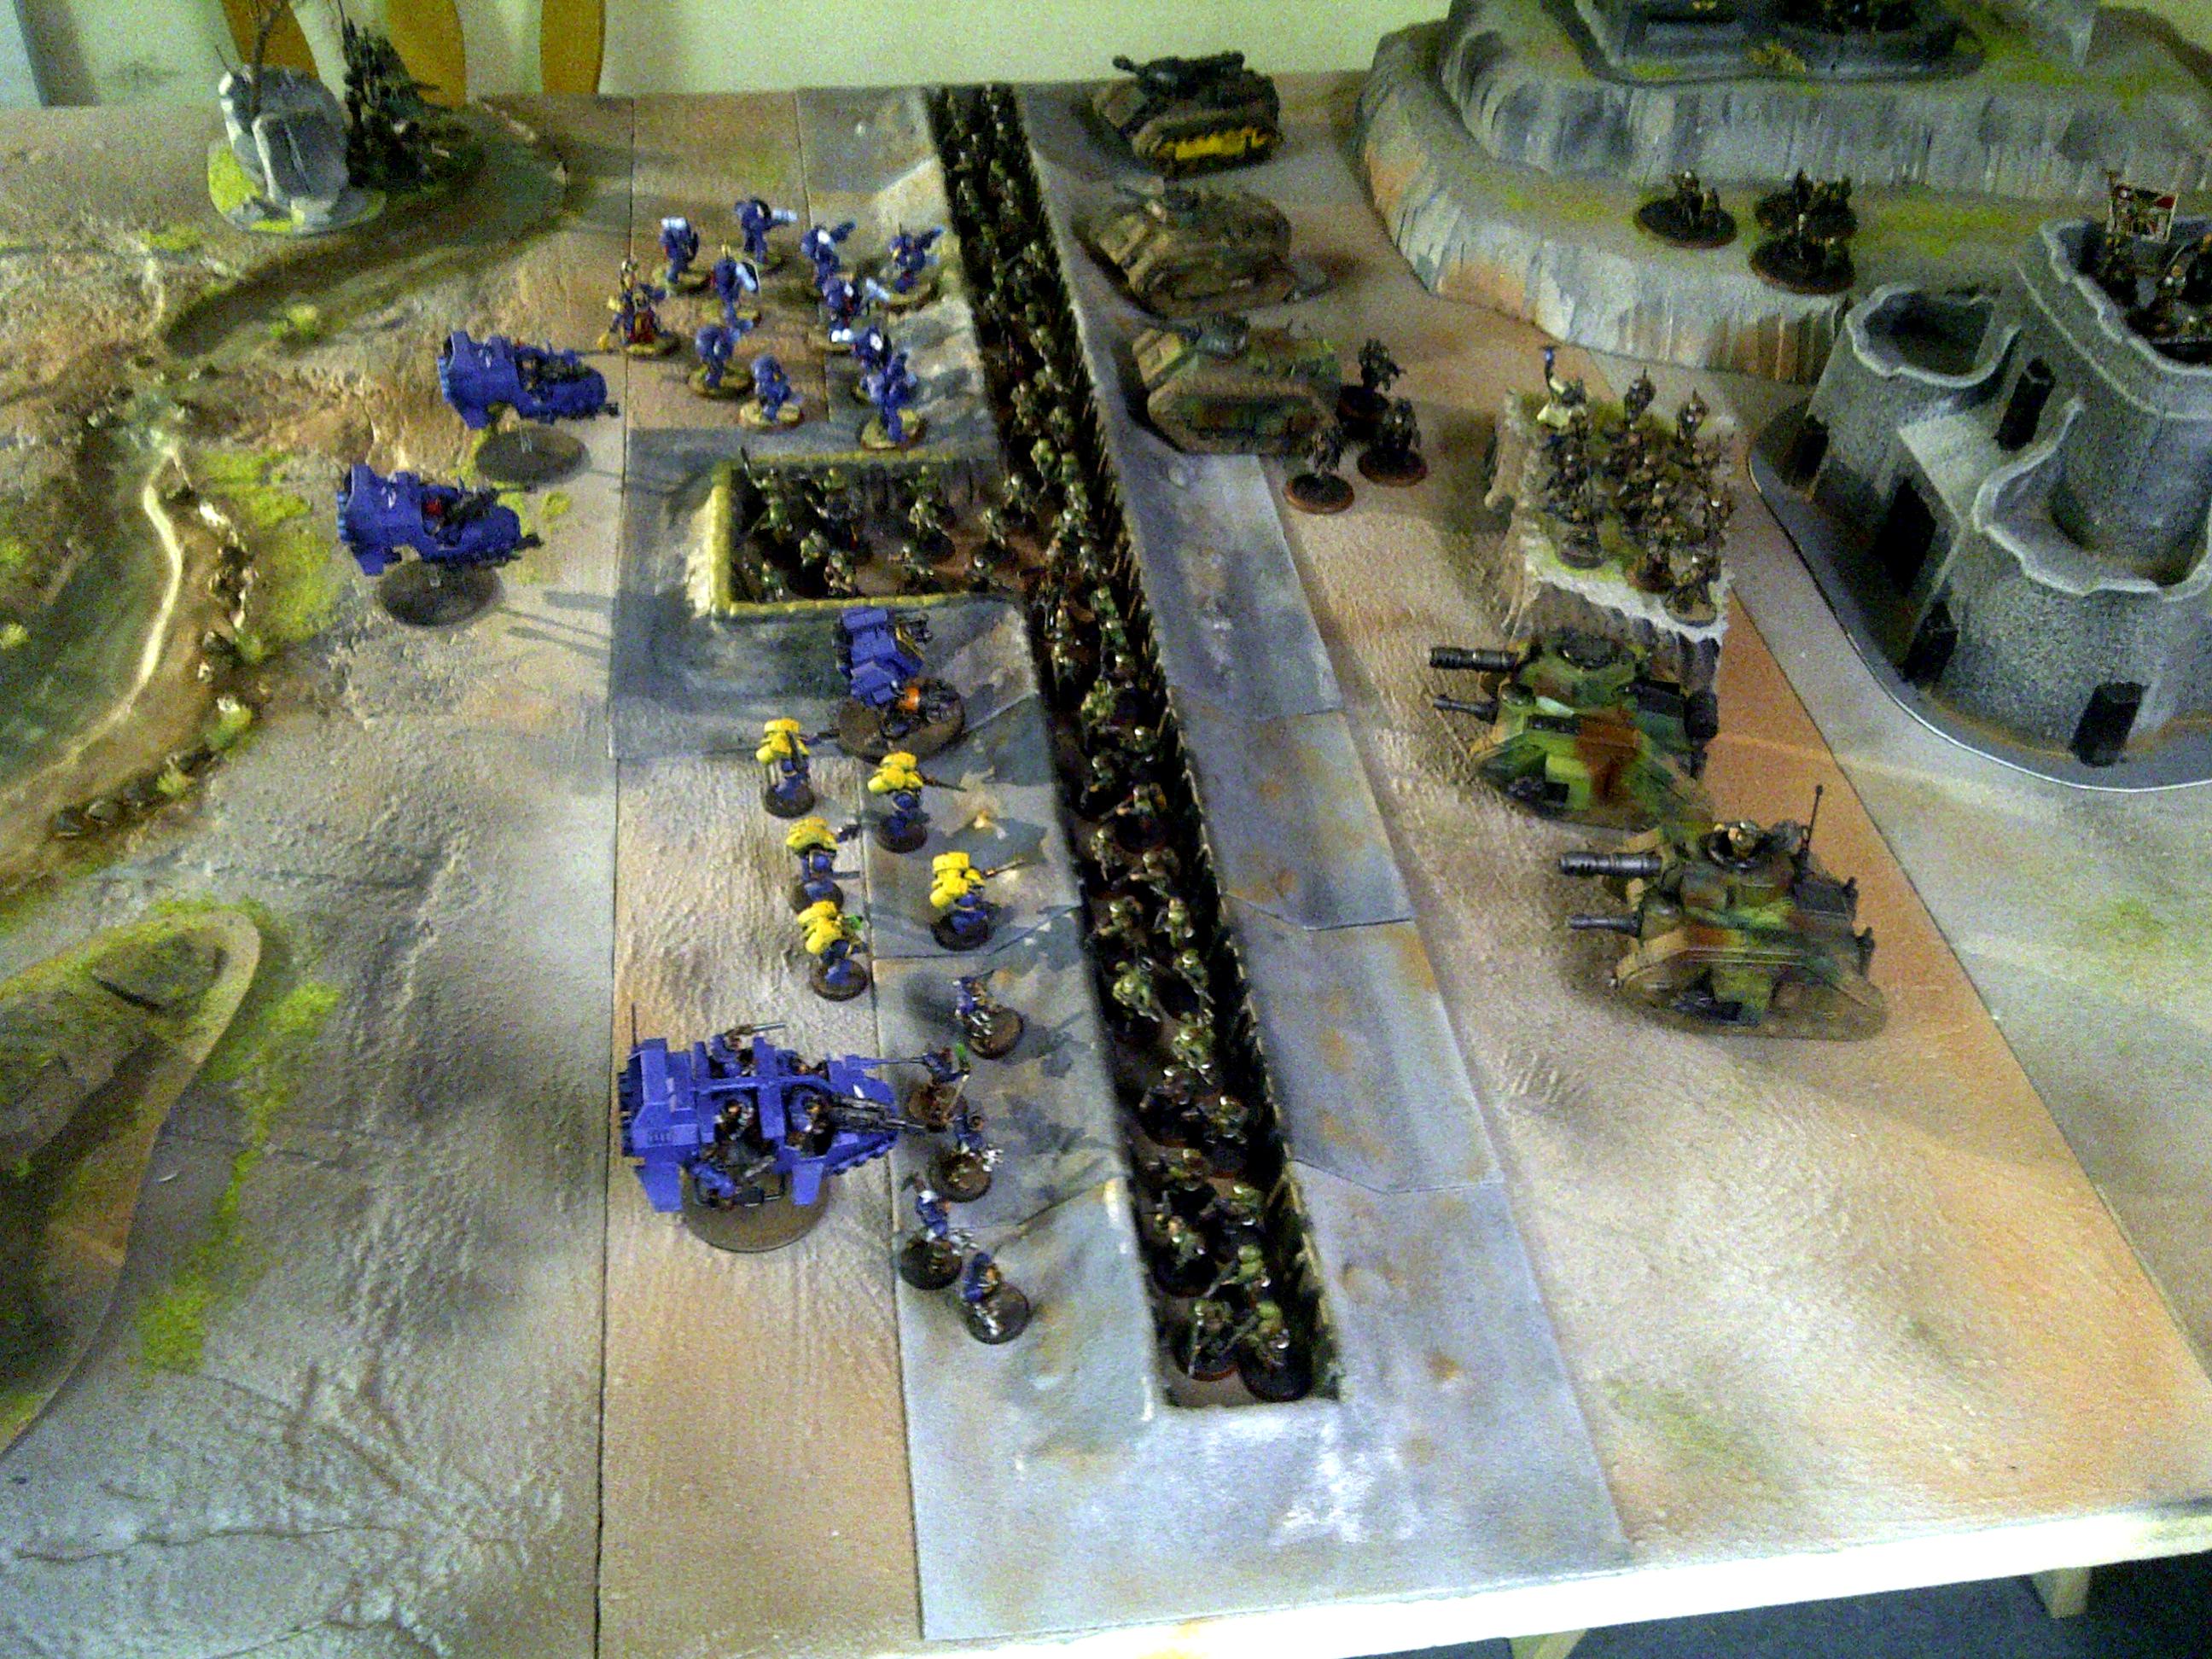 Imperial Guard, Space Marines, Trench Warfare